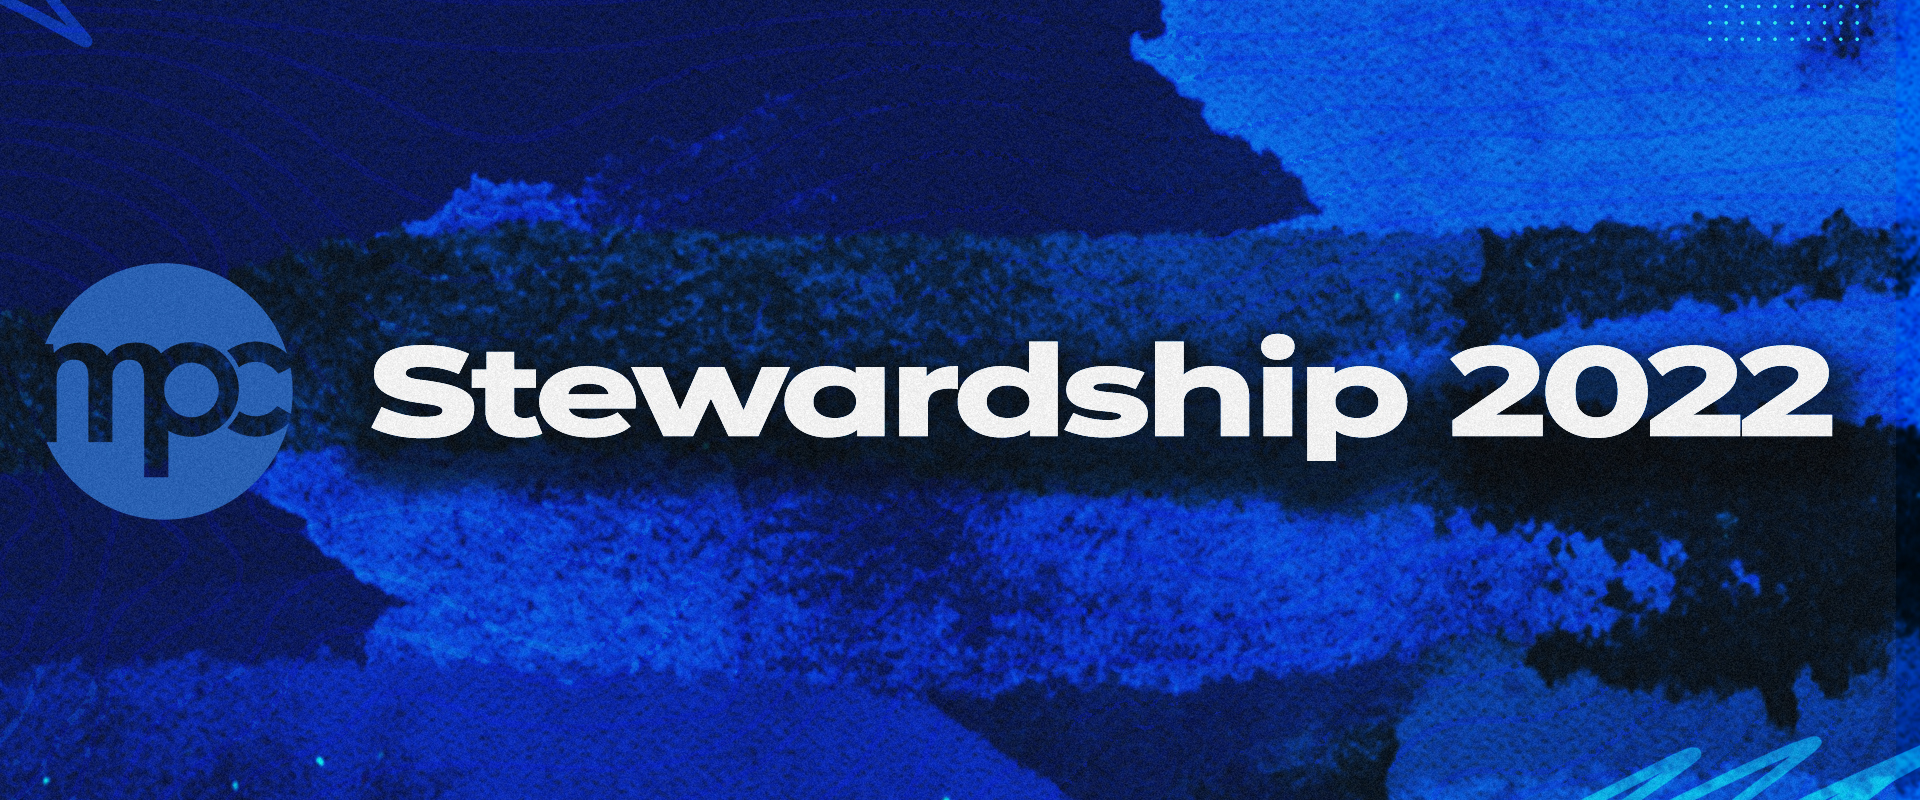 Stewardship 2022 at MPC

Use the form on this link to confidentially submit your pledge online.
